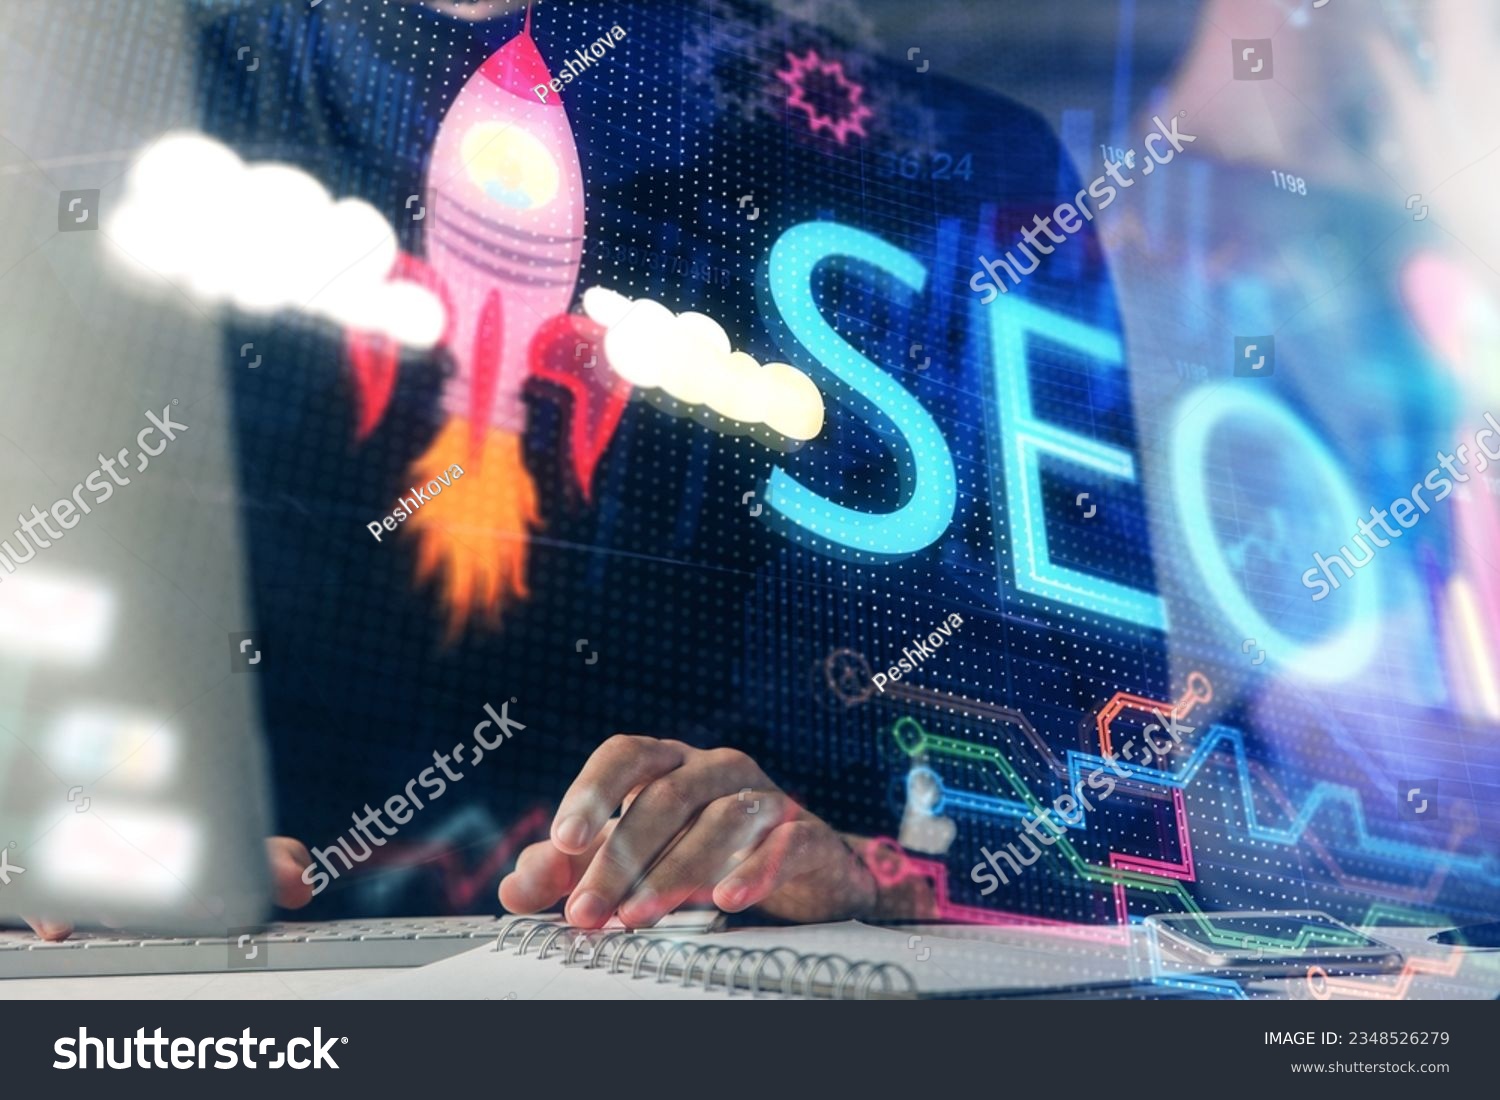 Multi exposure of seo icon with man working on computer on background. Concept of search engine optimization. #2348526279